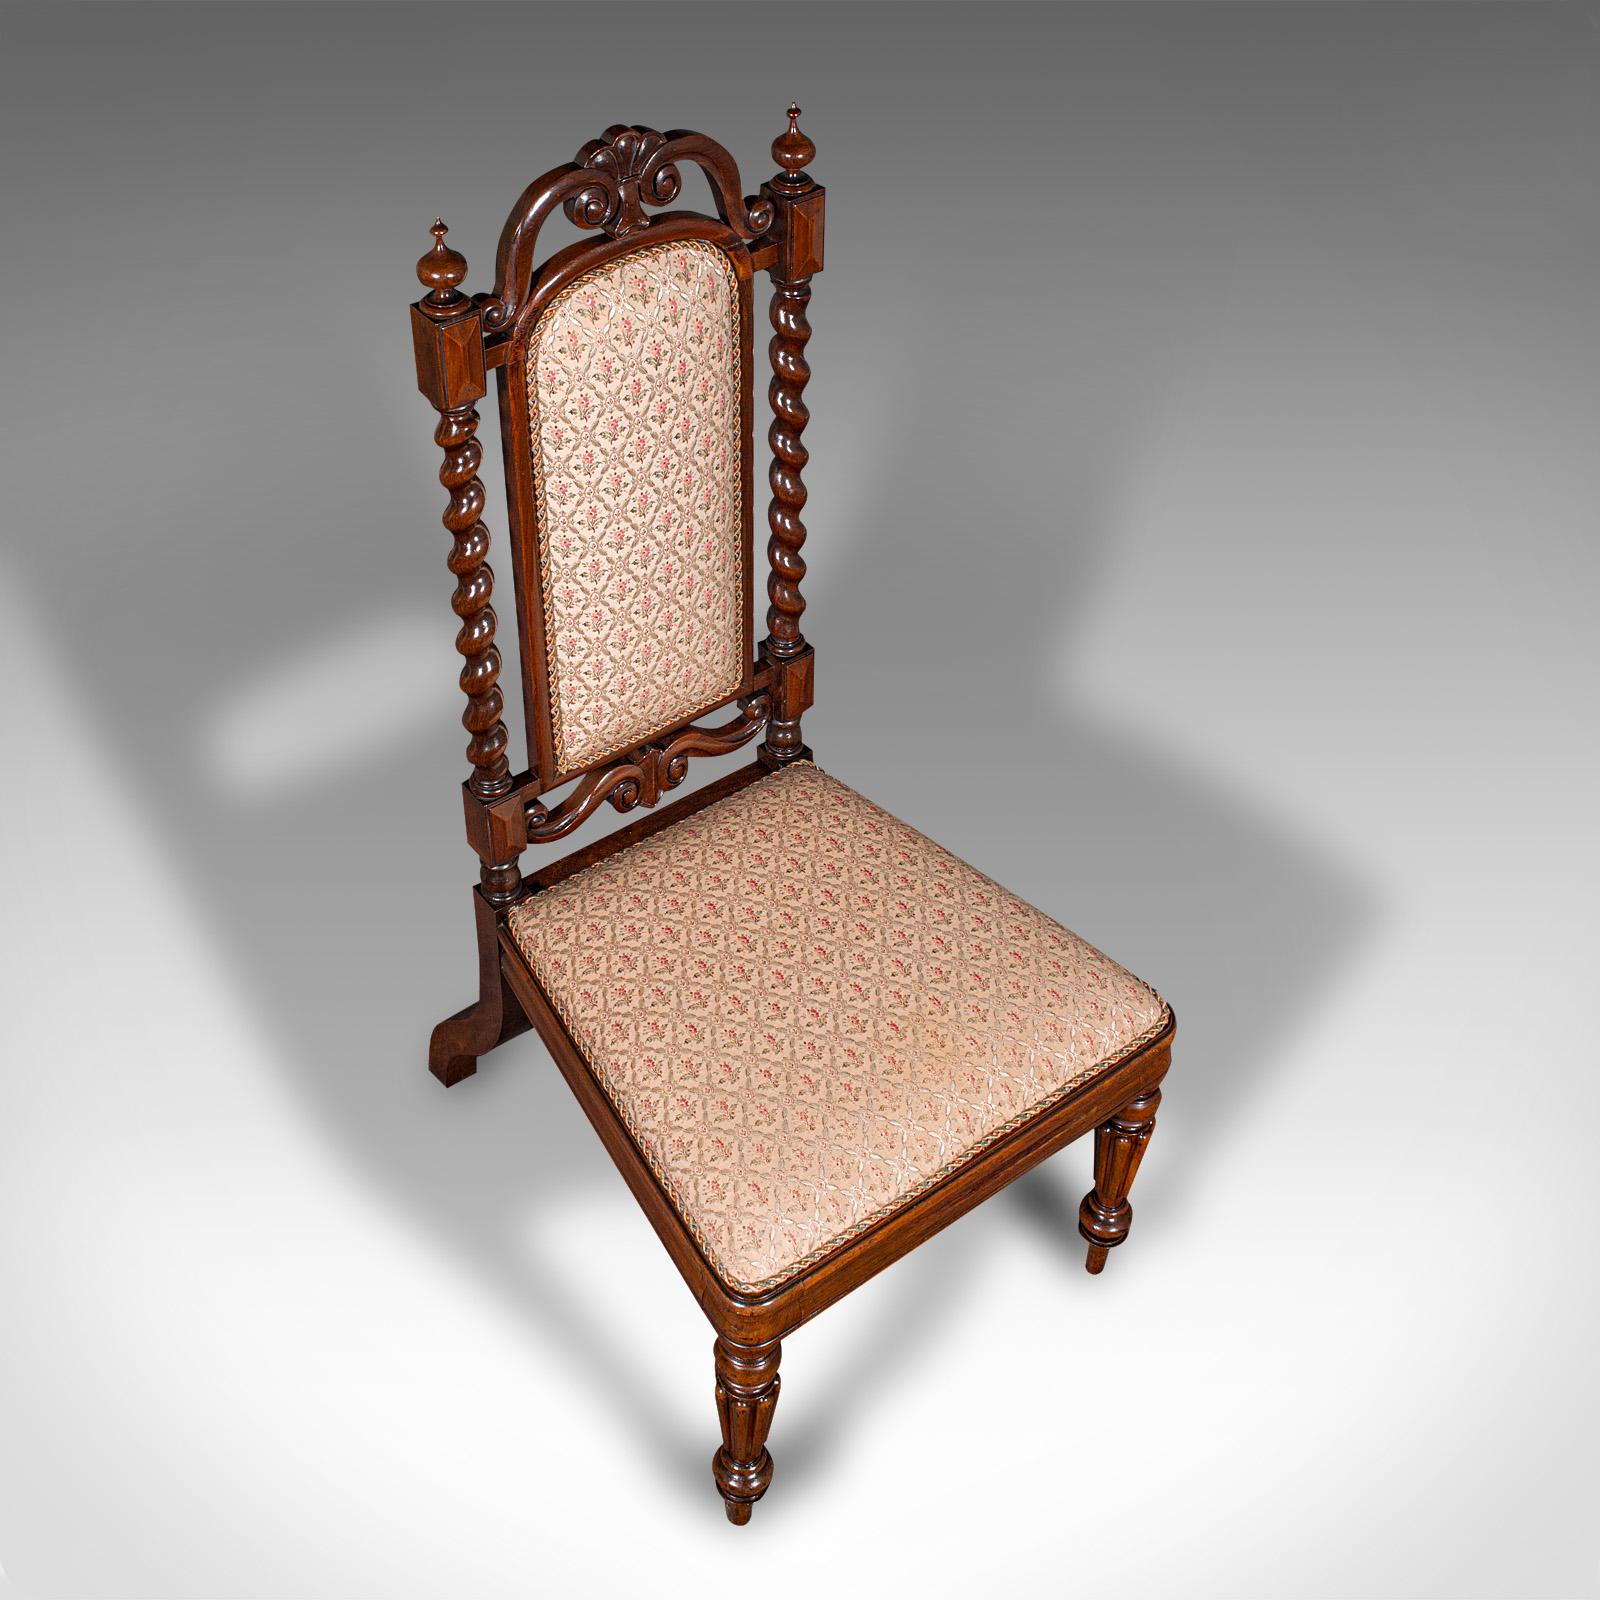 Wood Antique Morning Room Chair, English, Silk Cotton, Side Seat, William IV, C.1835 For Sale